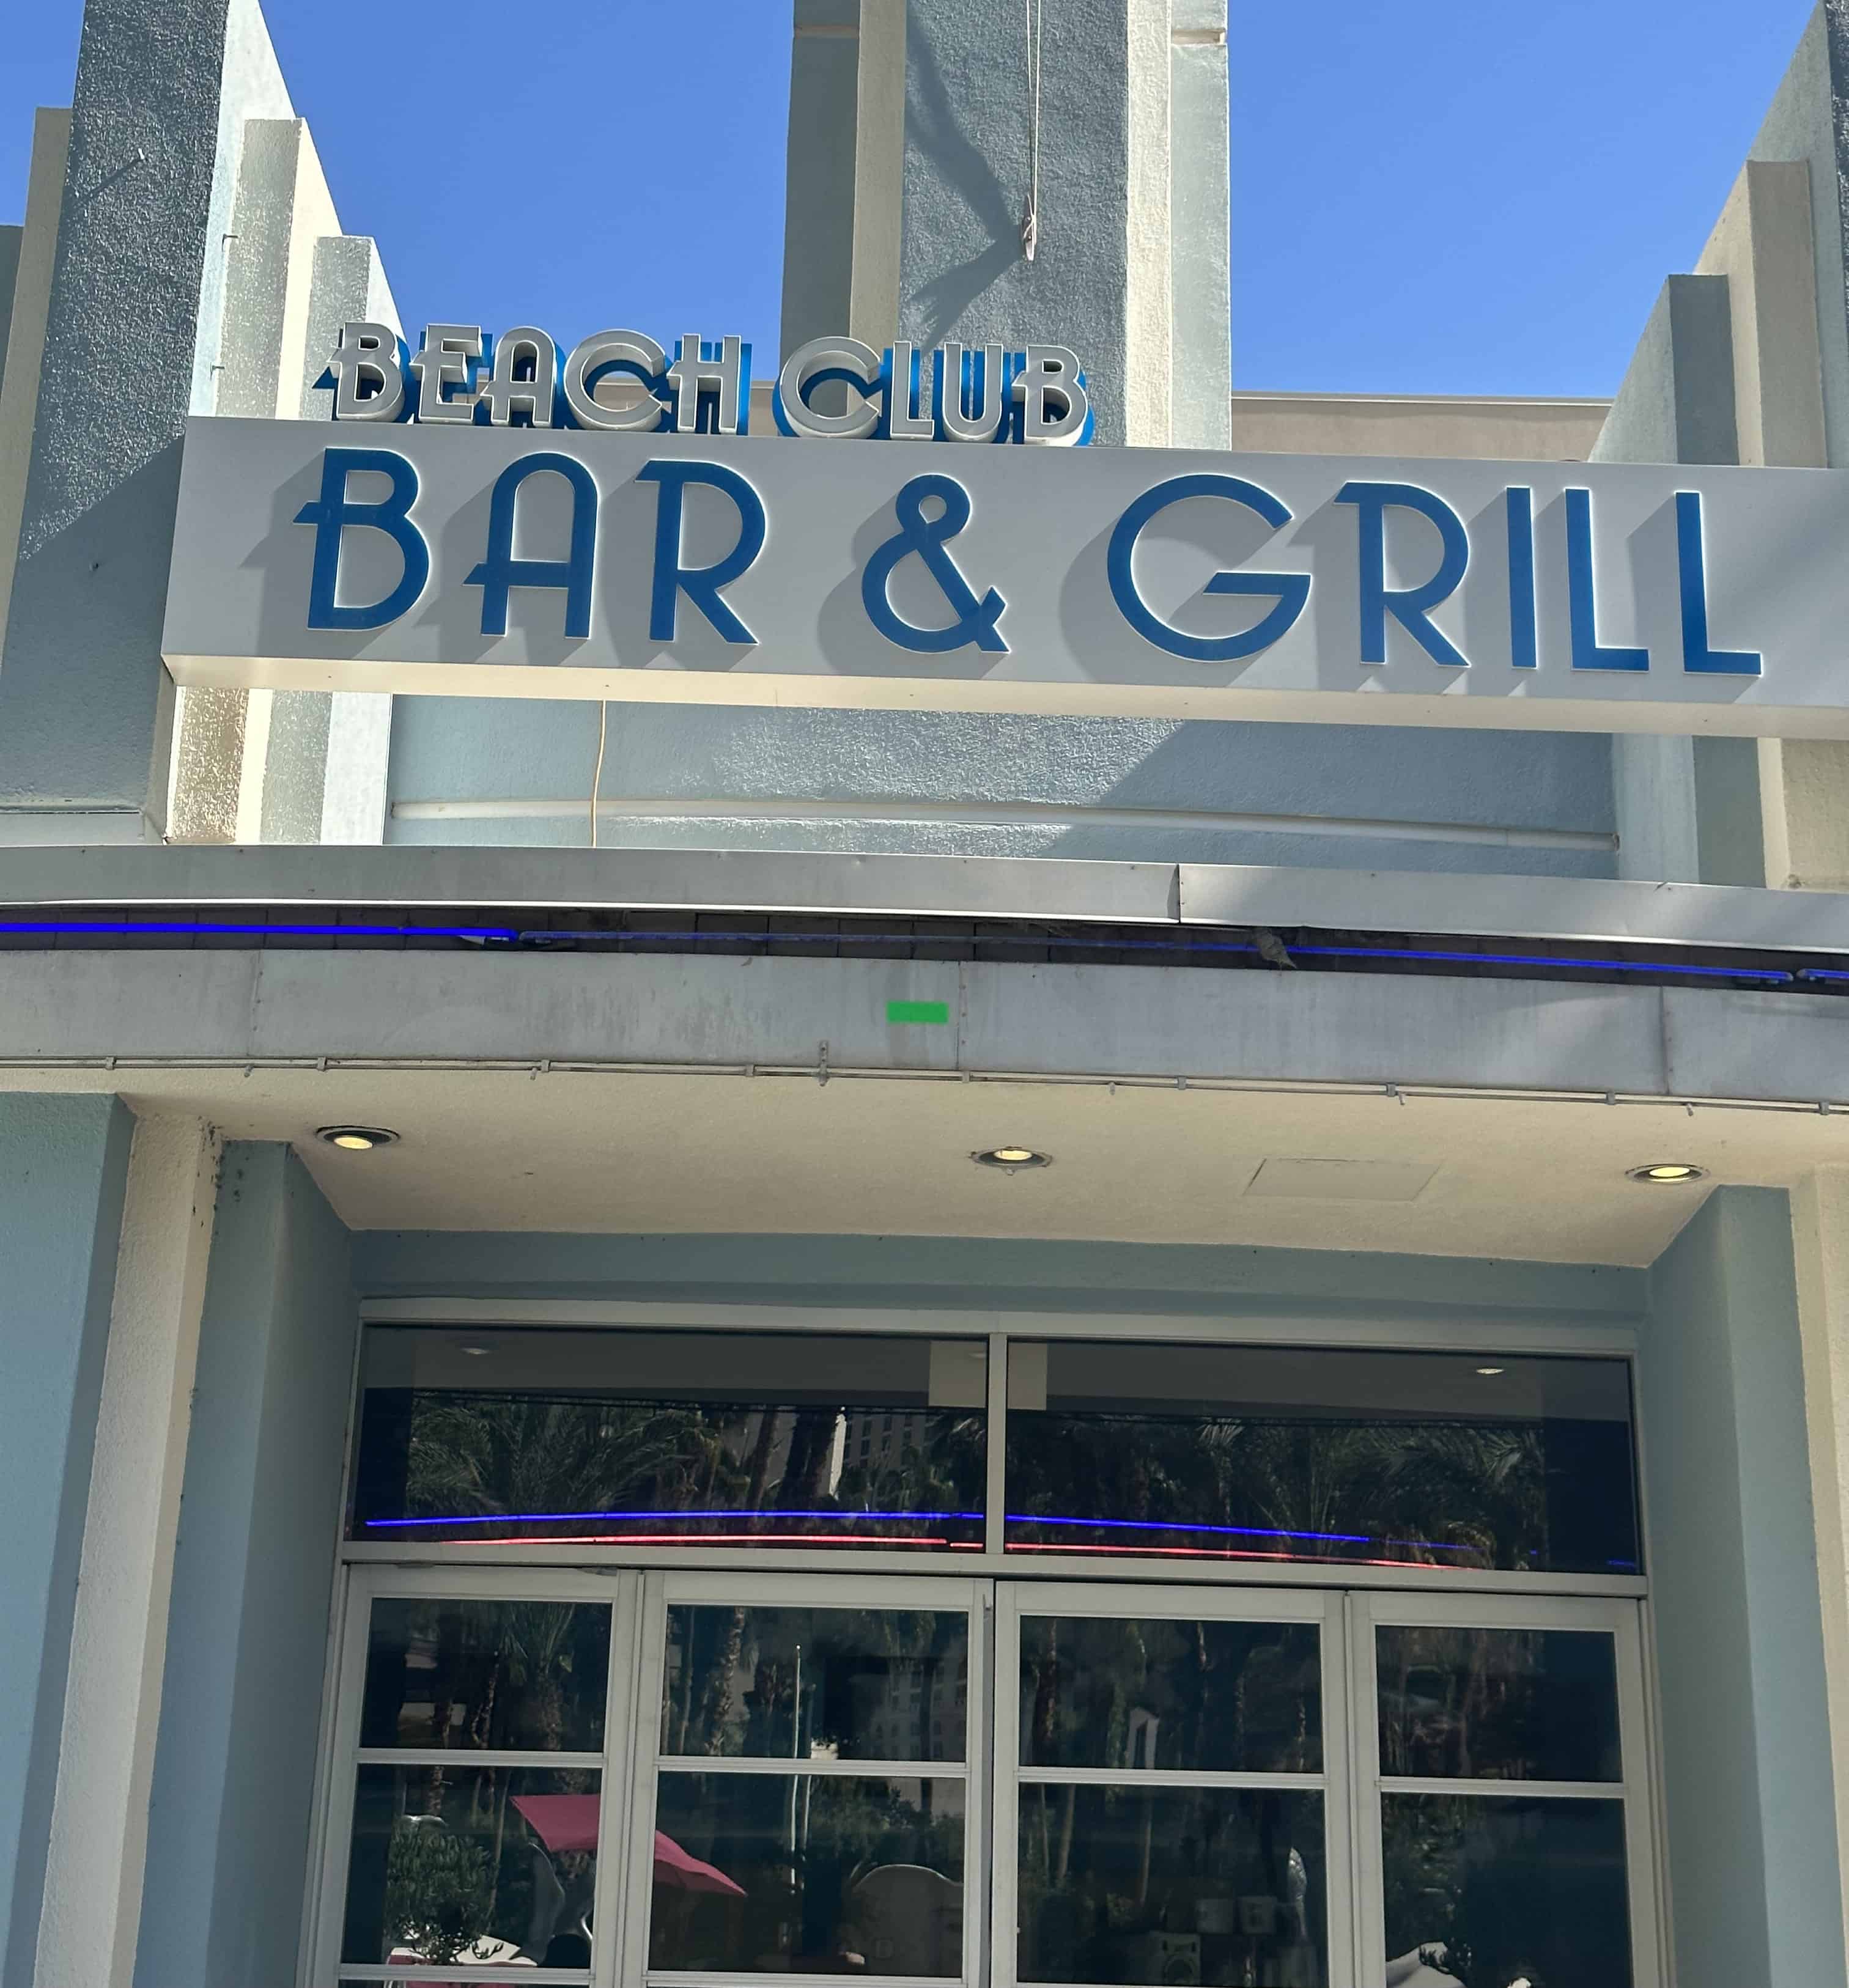 Outside view of the Beach Club Bar and Grill.  Large blue signage is above the entrance.